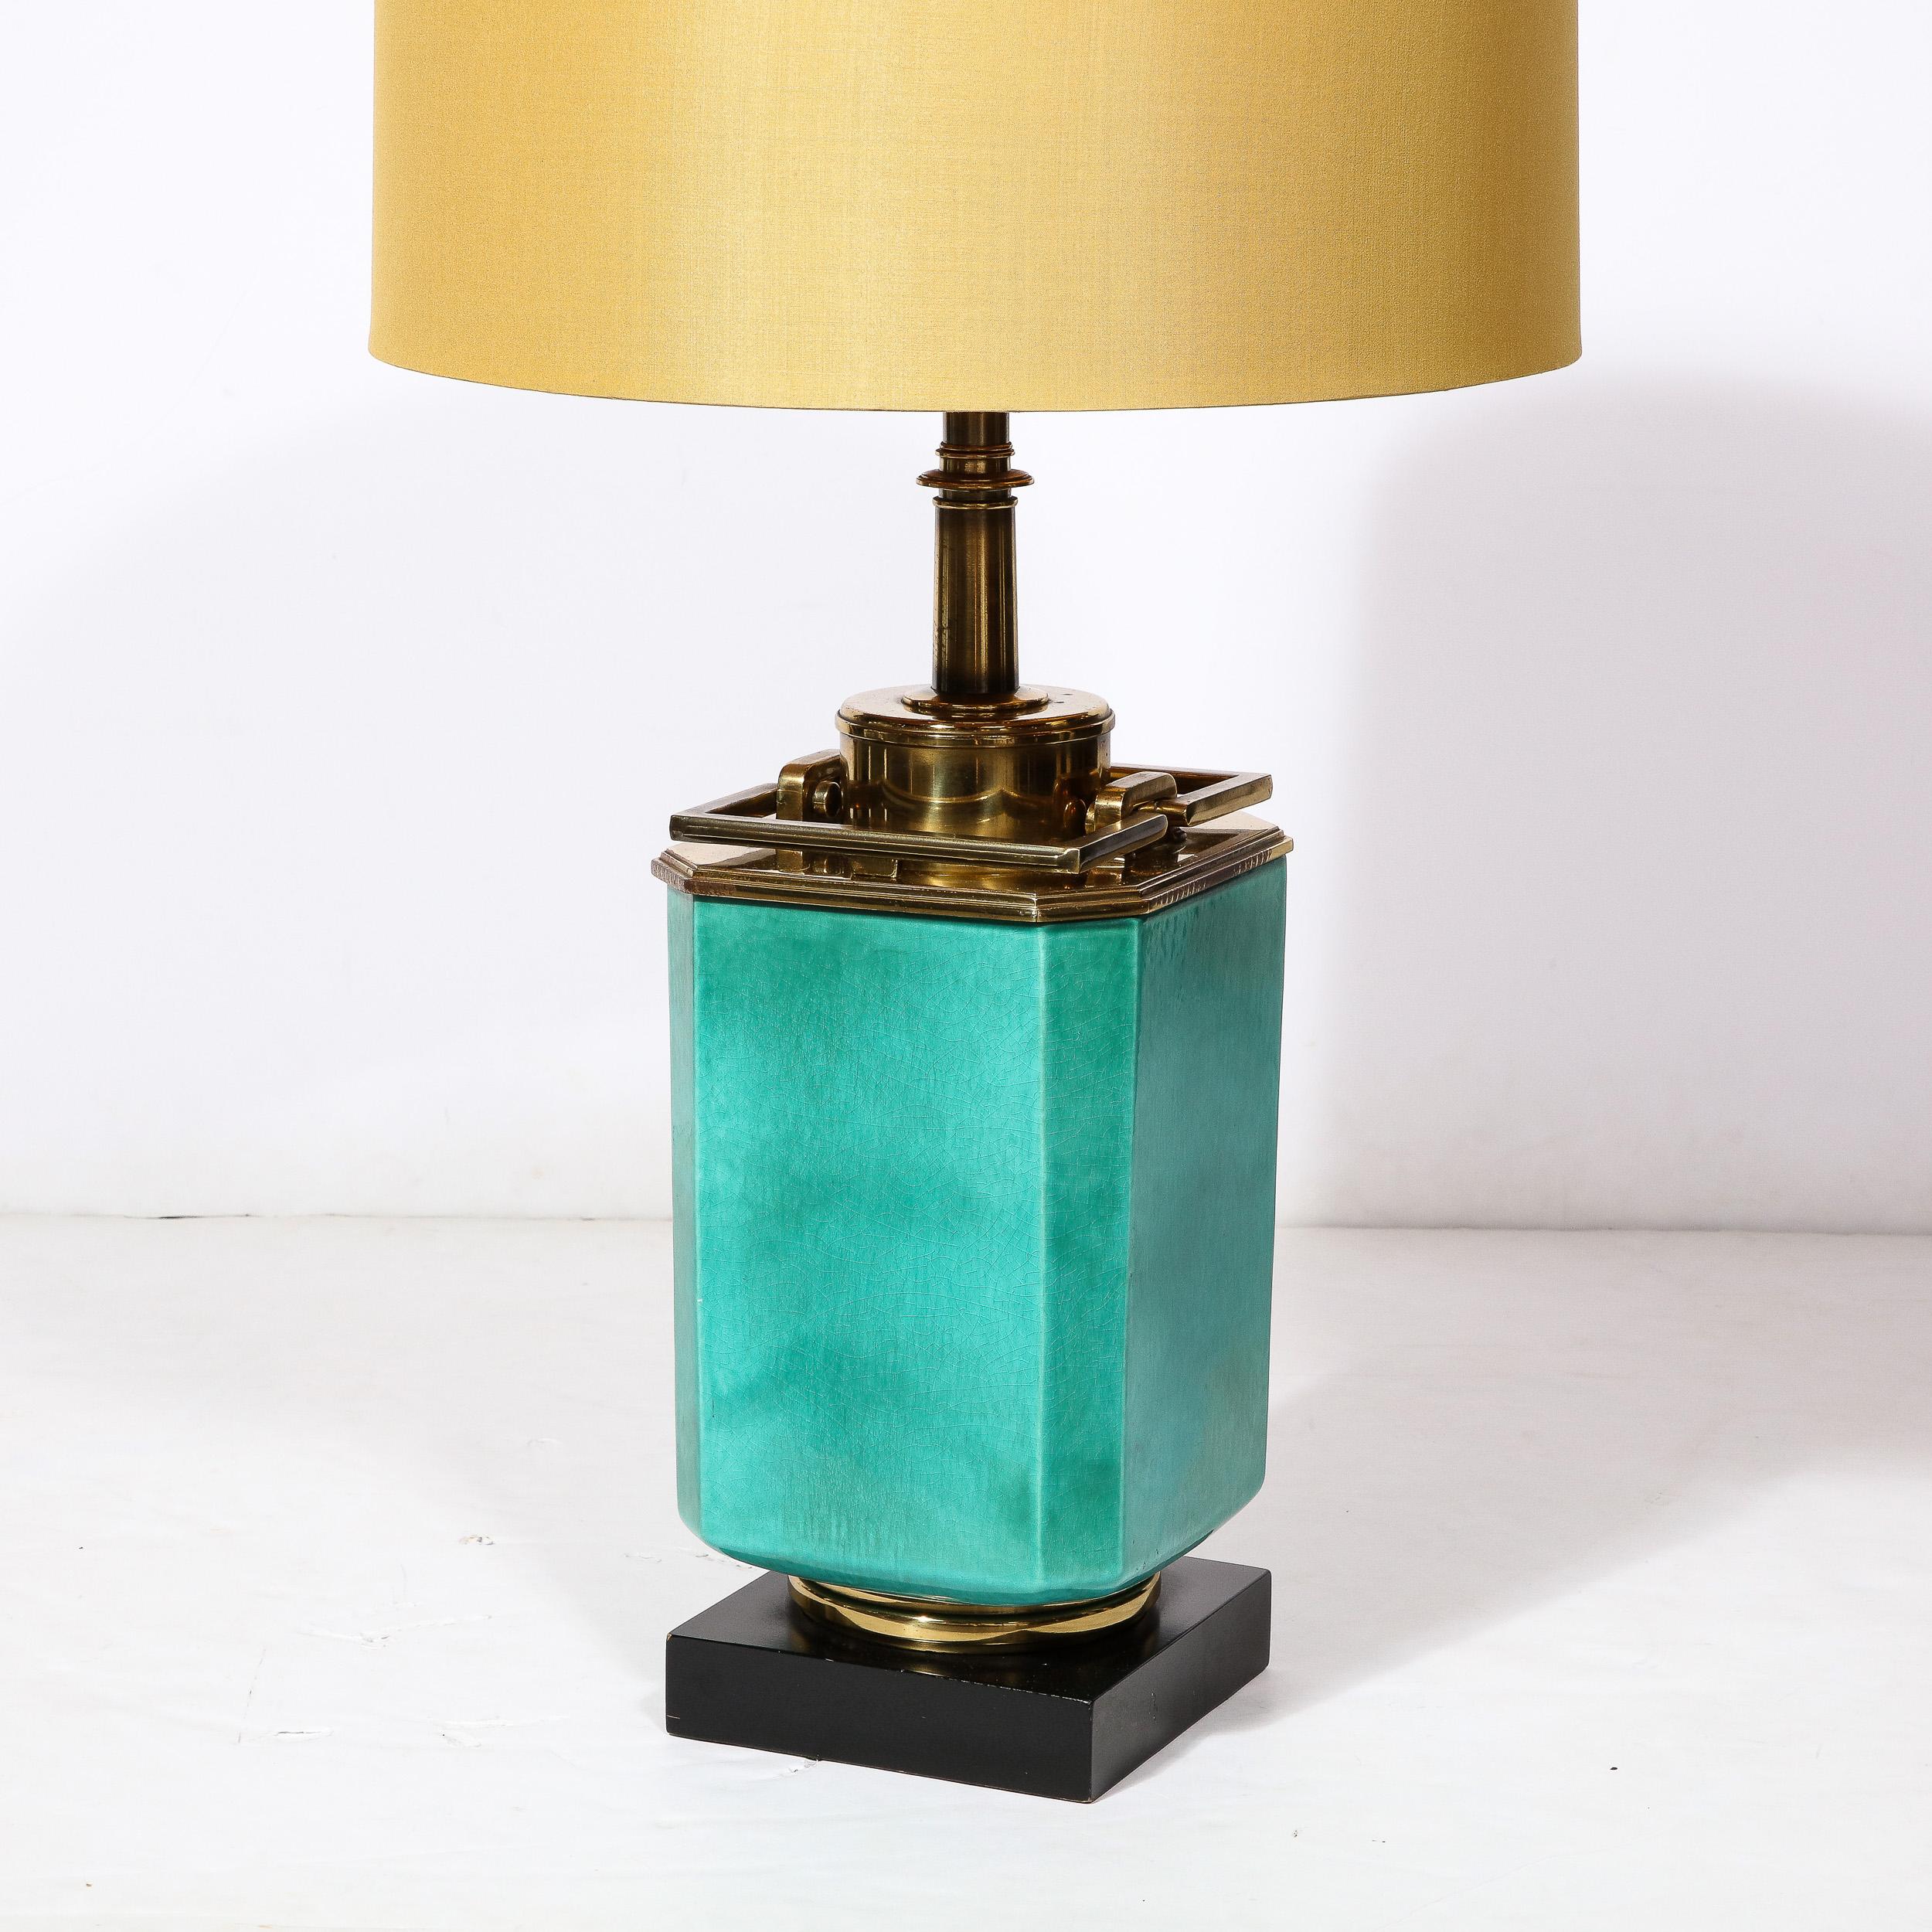 This beautifully bold single Jade Table Lamp originates from the United States during the 1950s Featuring a body in a lovely cool turquoise green with a bold rectangular profile, the top of the body beneath the shade is composed beautifully